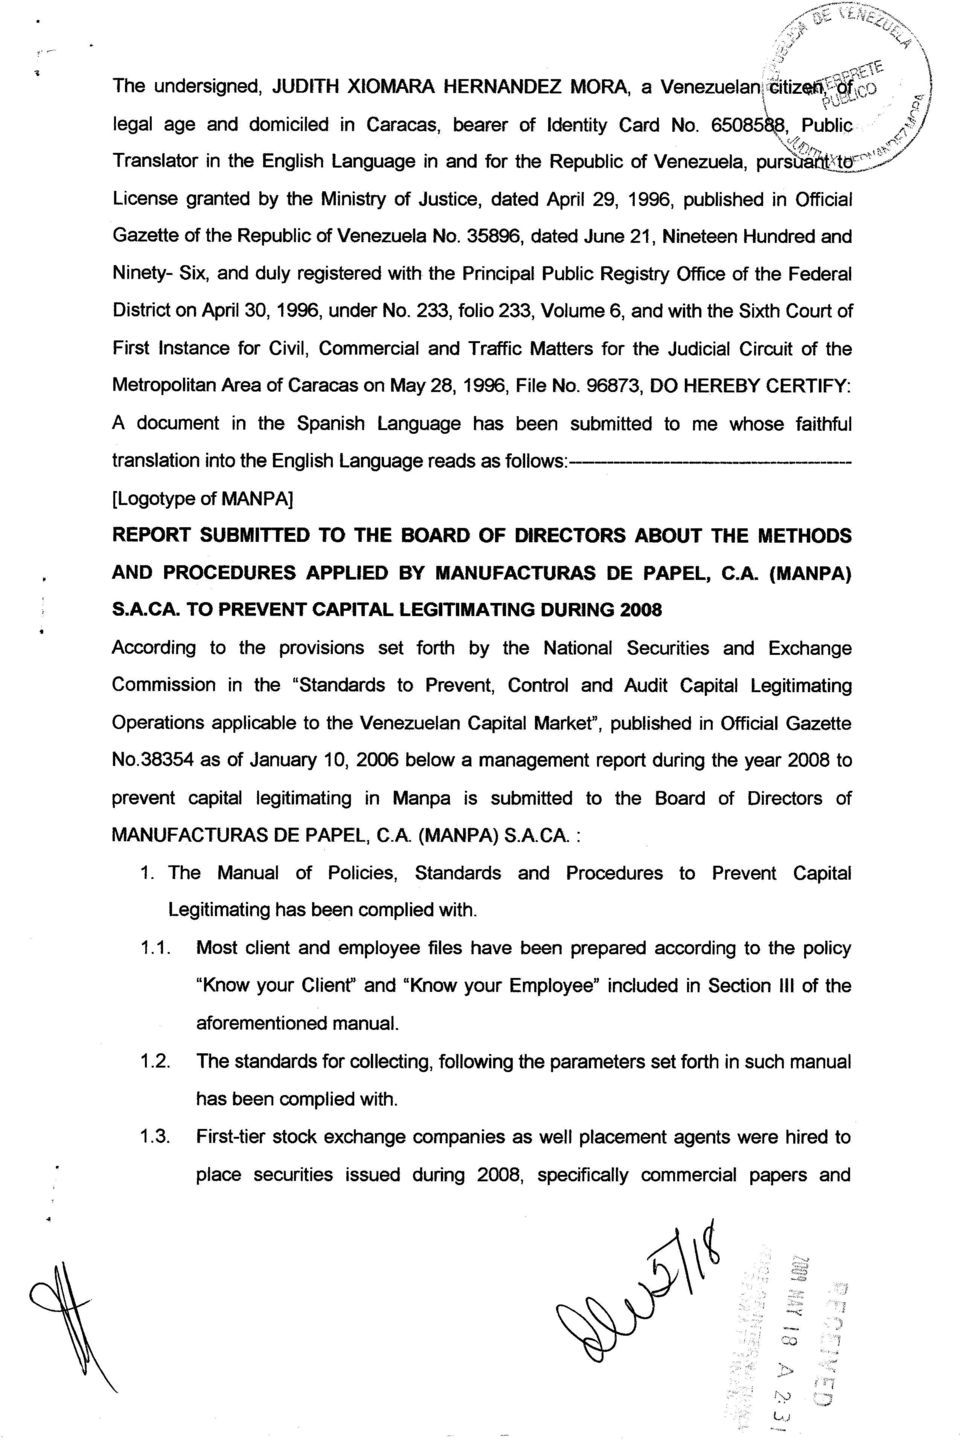 Ninety- Six and duly registered with the Principal Public Registry Office of the Federal District on April 30 1996 under No 233 folio 233 Volume and with the Sixth Court of First Instance for Civil